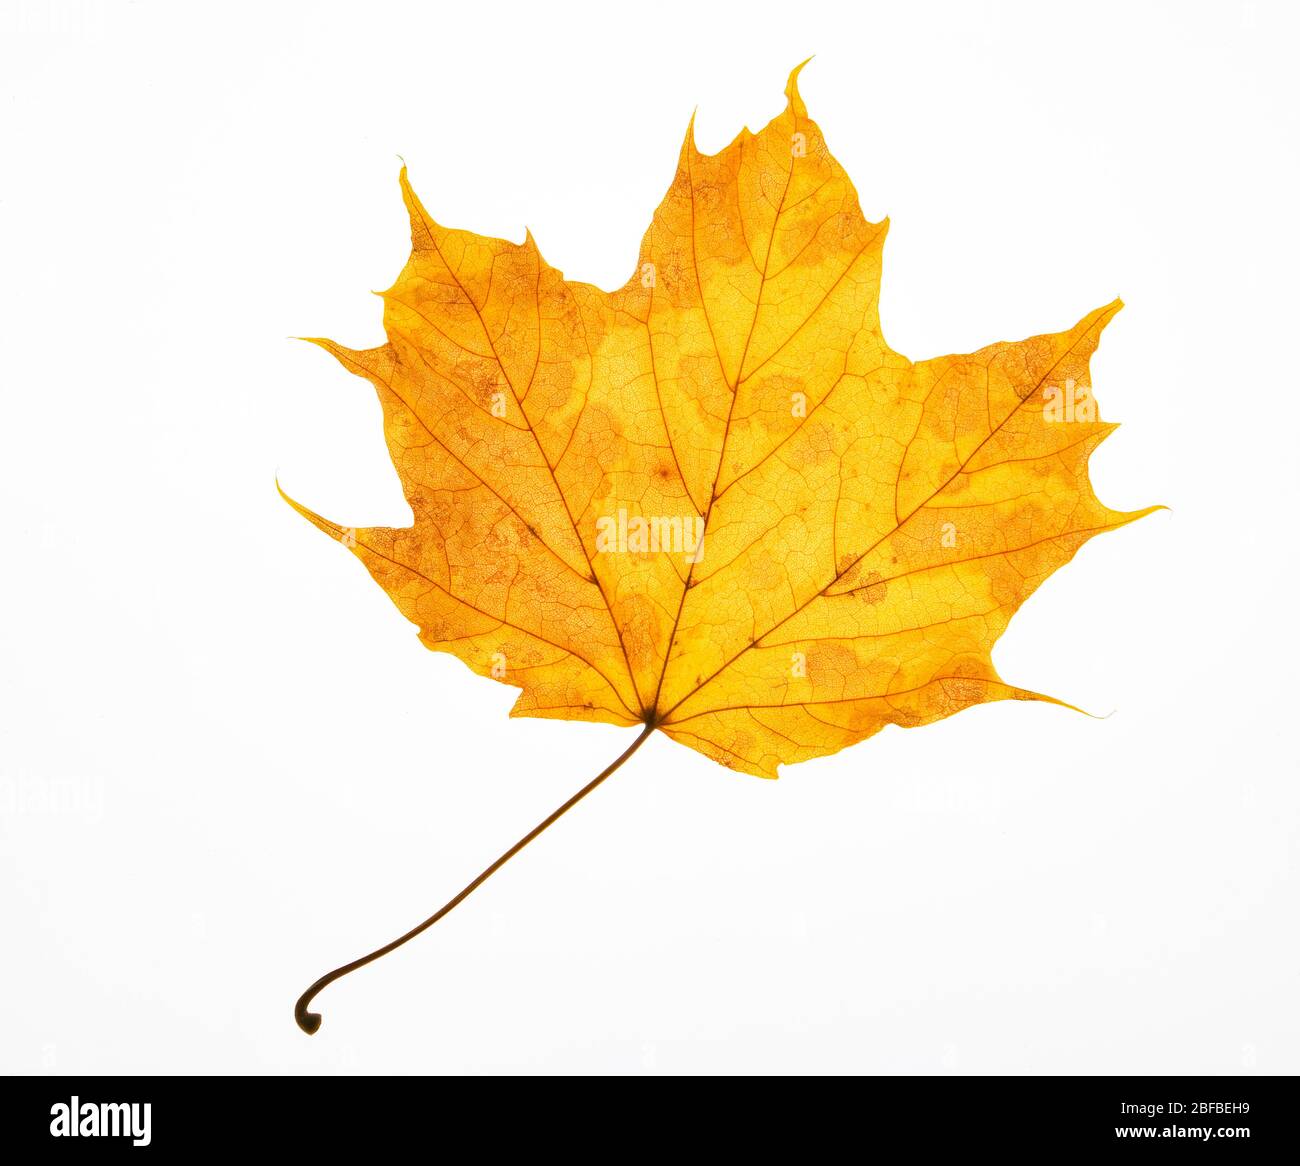 Autumnally coloured yellow leaf from Norway maple (Acer platanoides), Austria Stock Photo